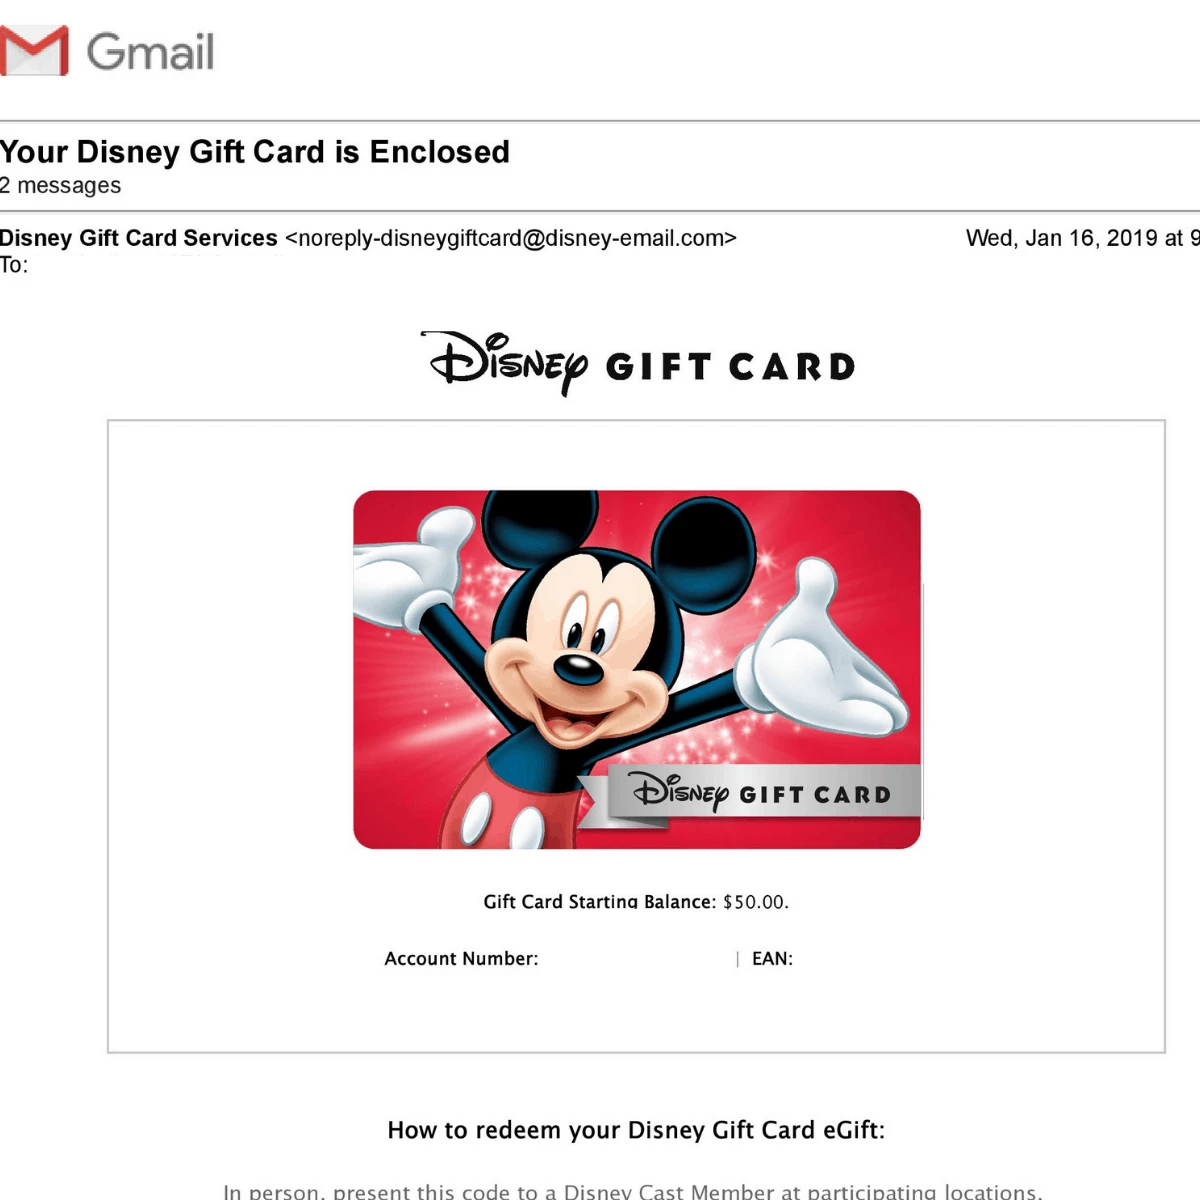 Disney gift card housekeeping featured